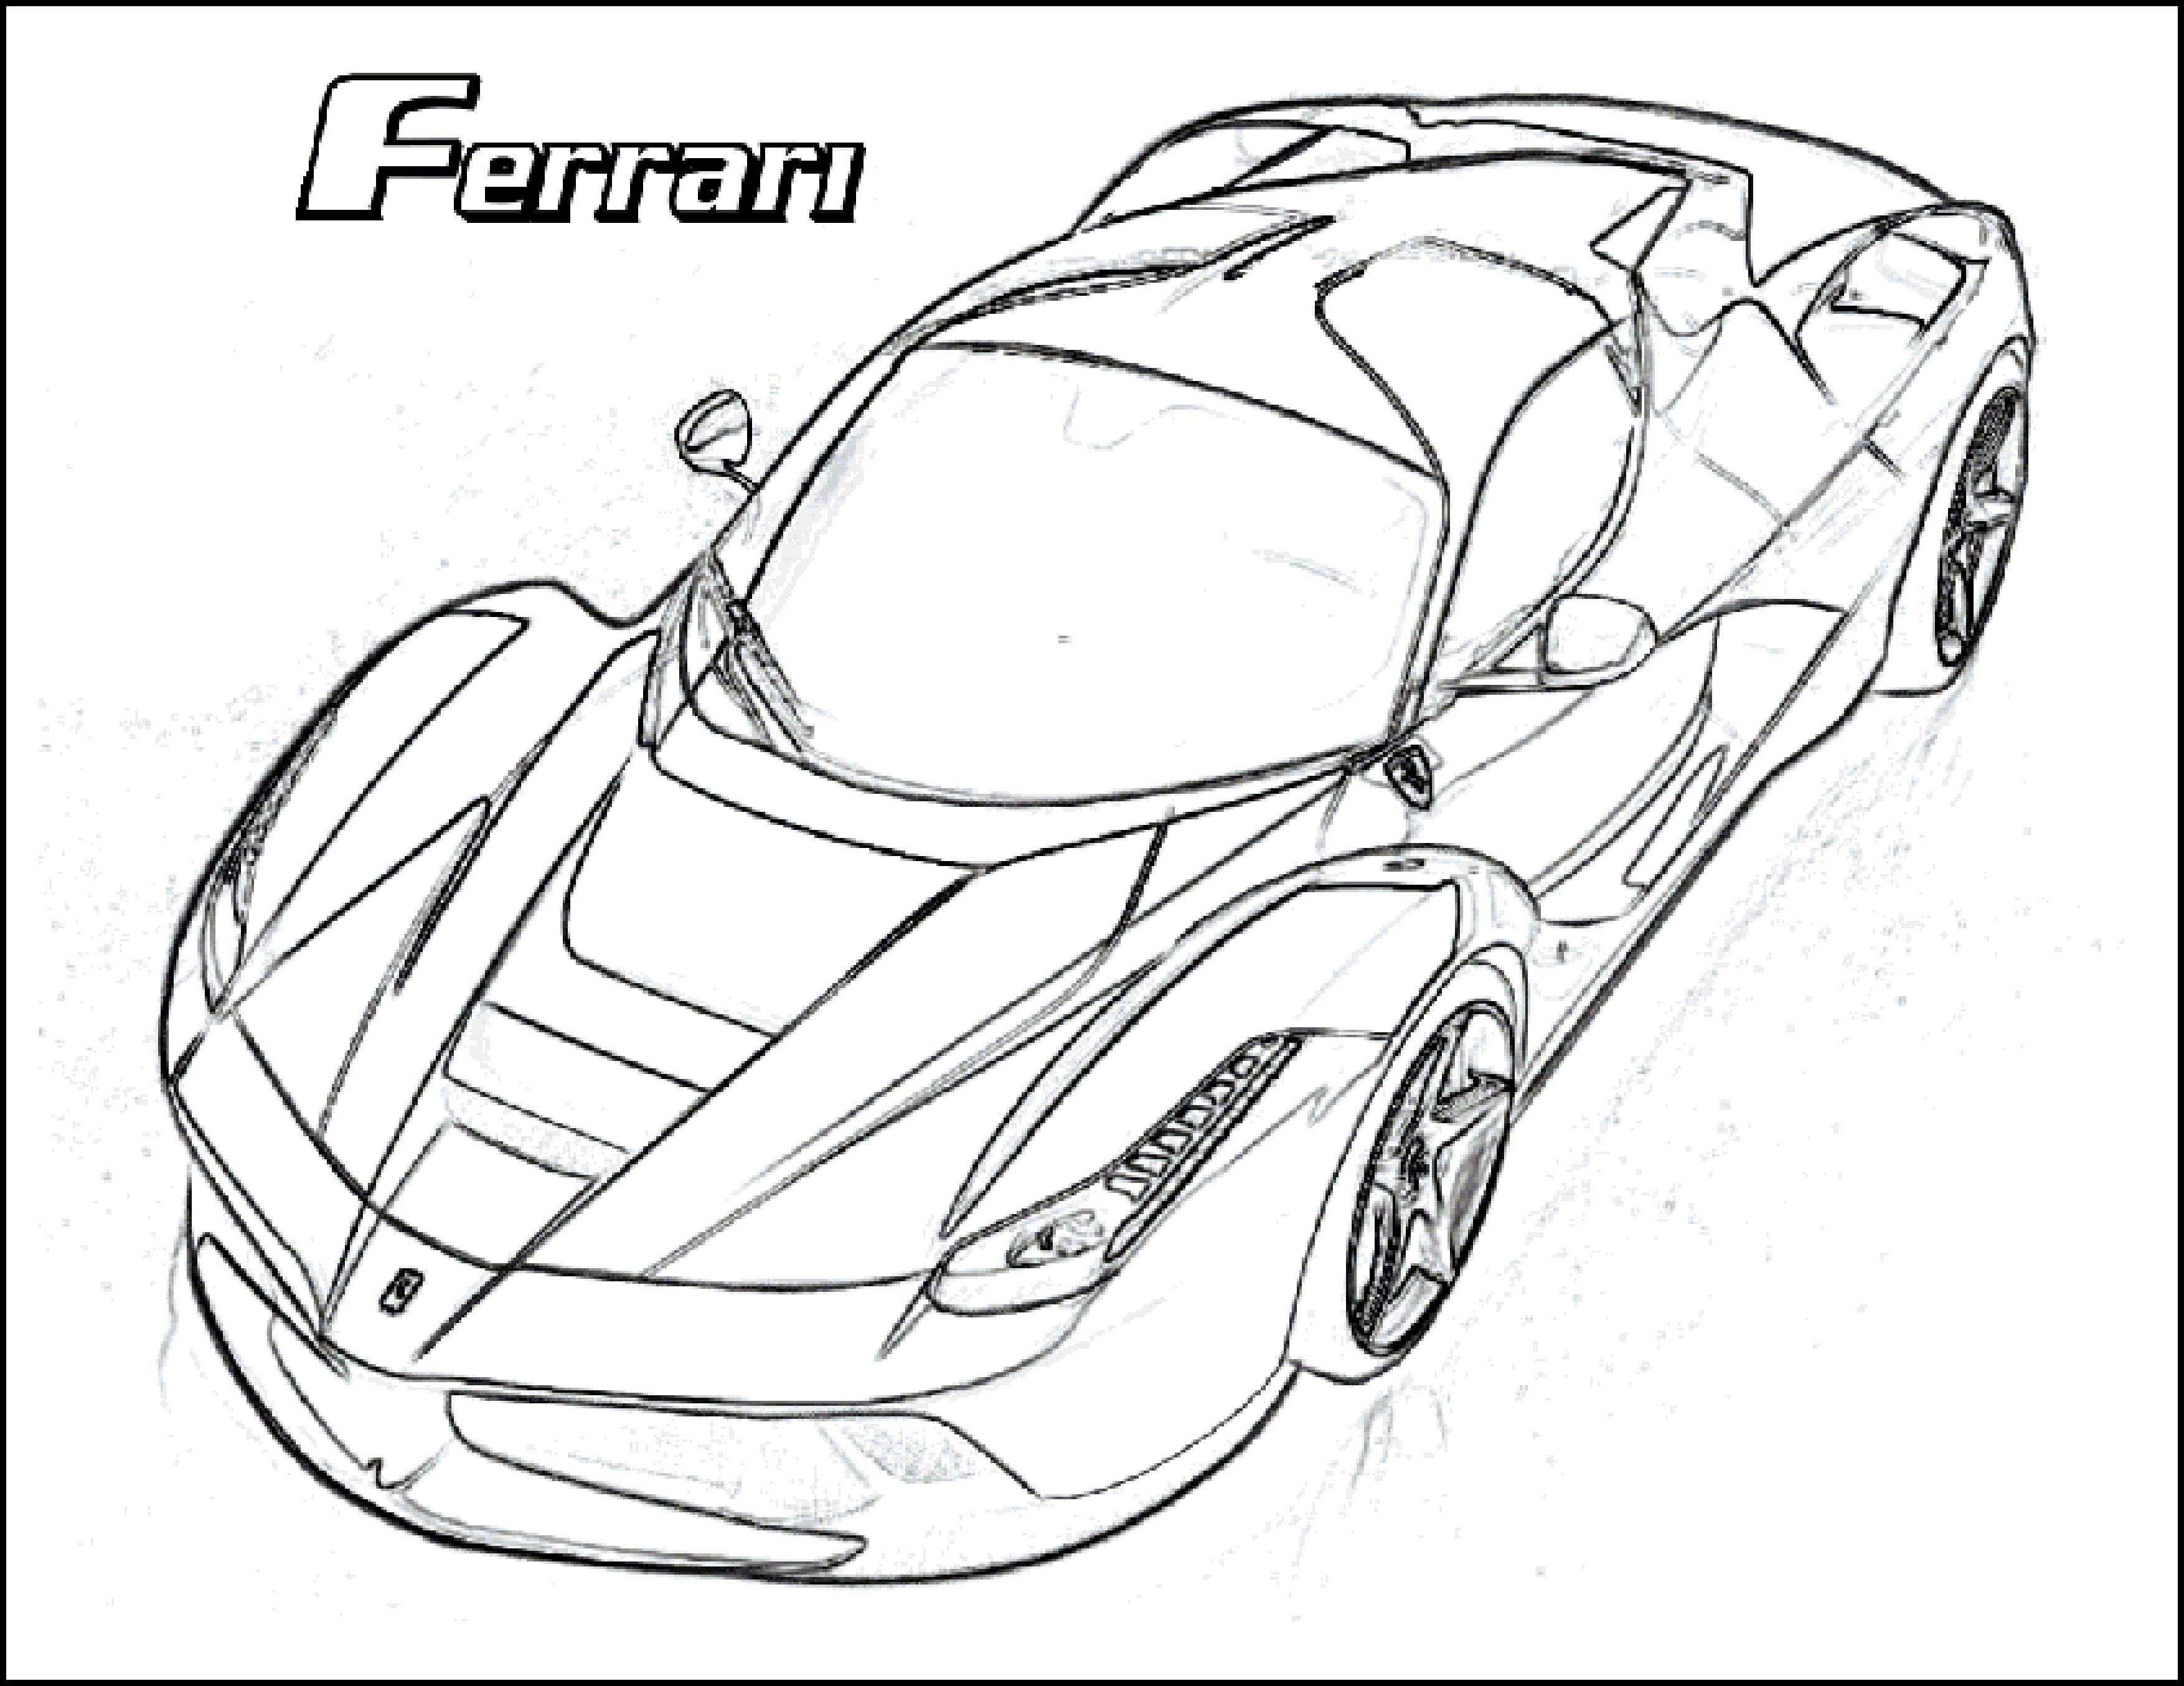 Miranda On Twitter New Post Sports Car Coloring Pages Ferrari Has Been Published On New Hd